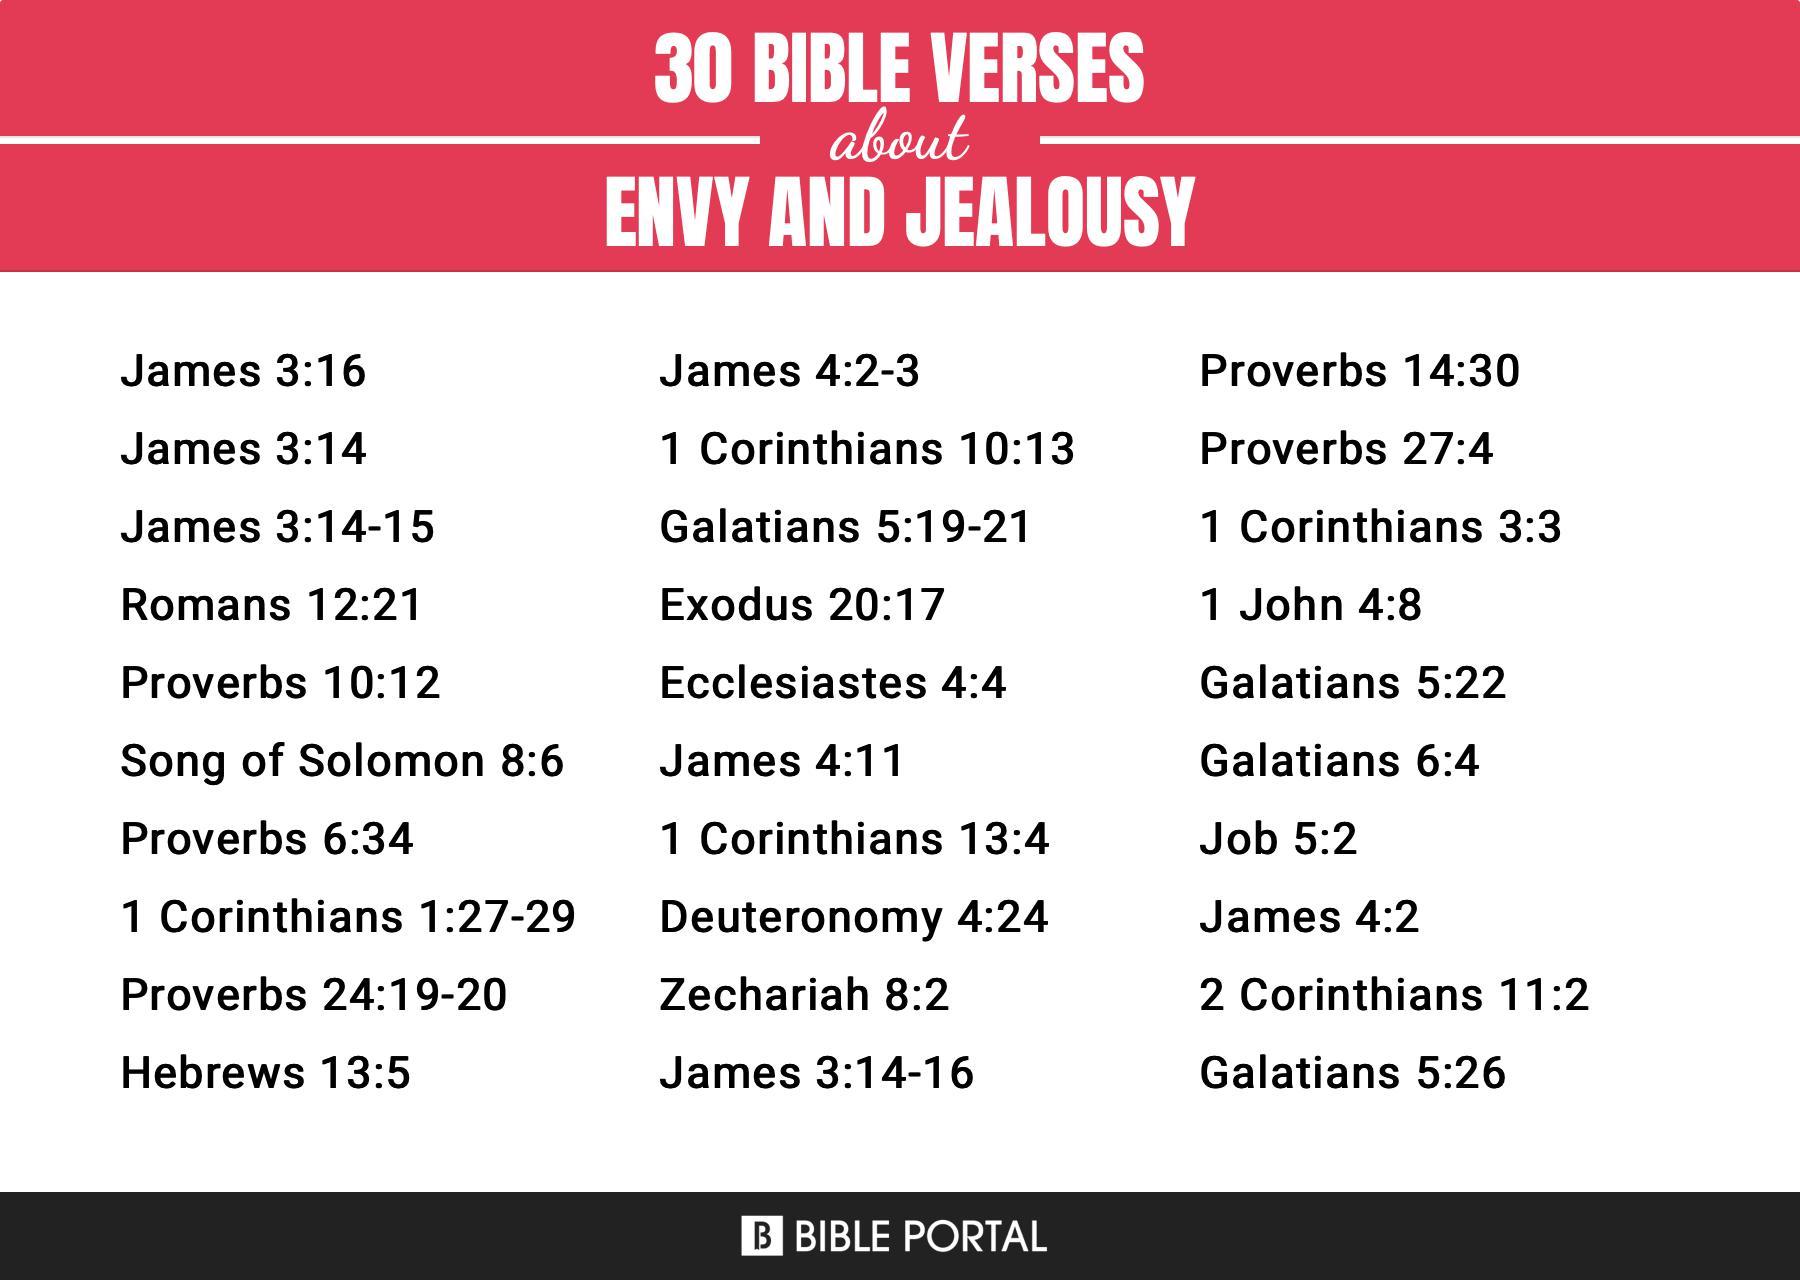 What Does the Bible Say about Envy And Jealousy?